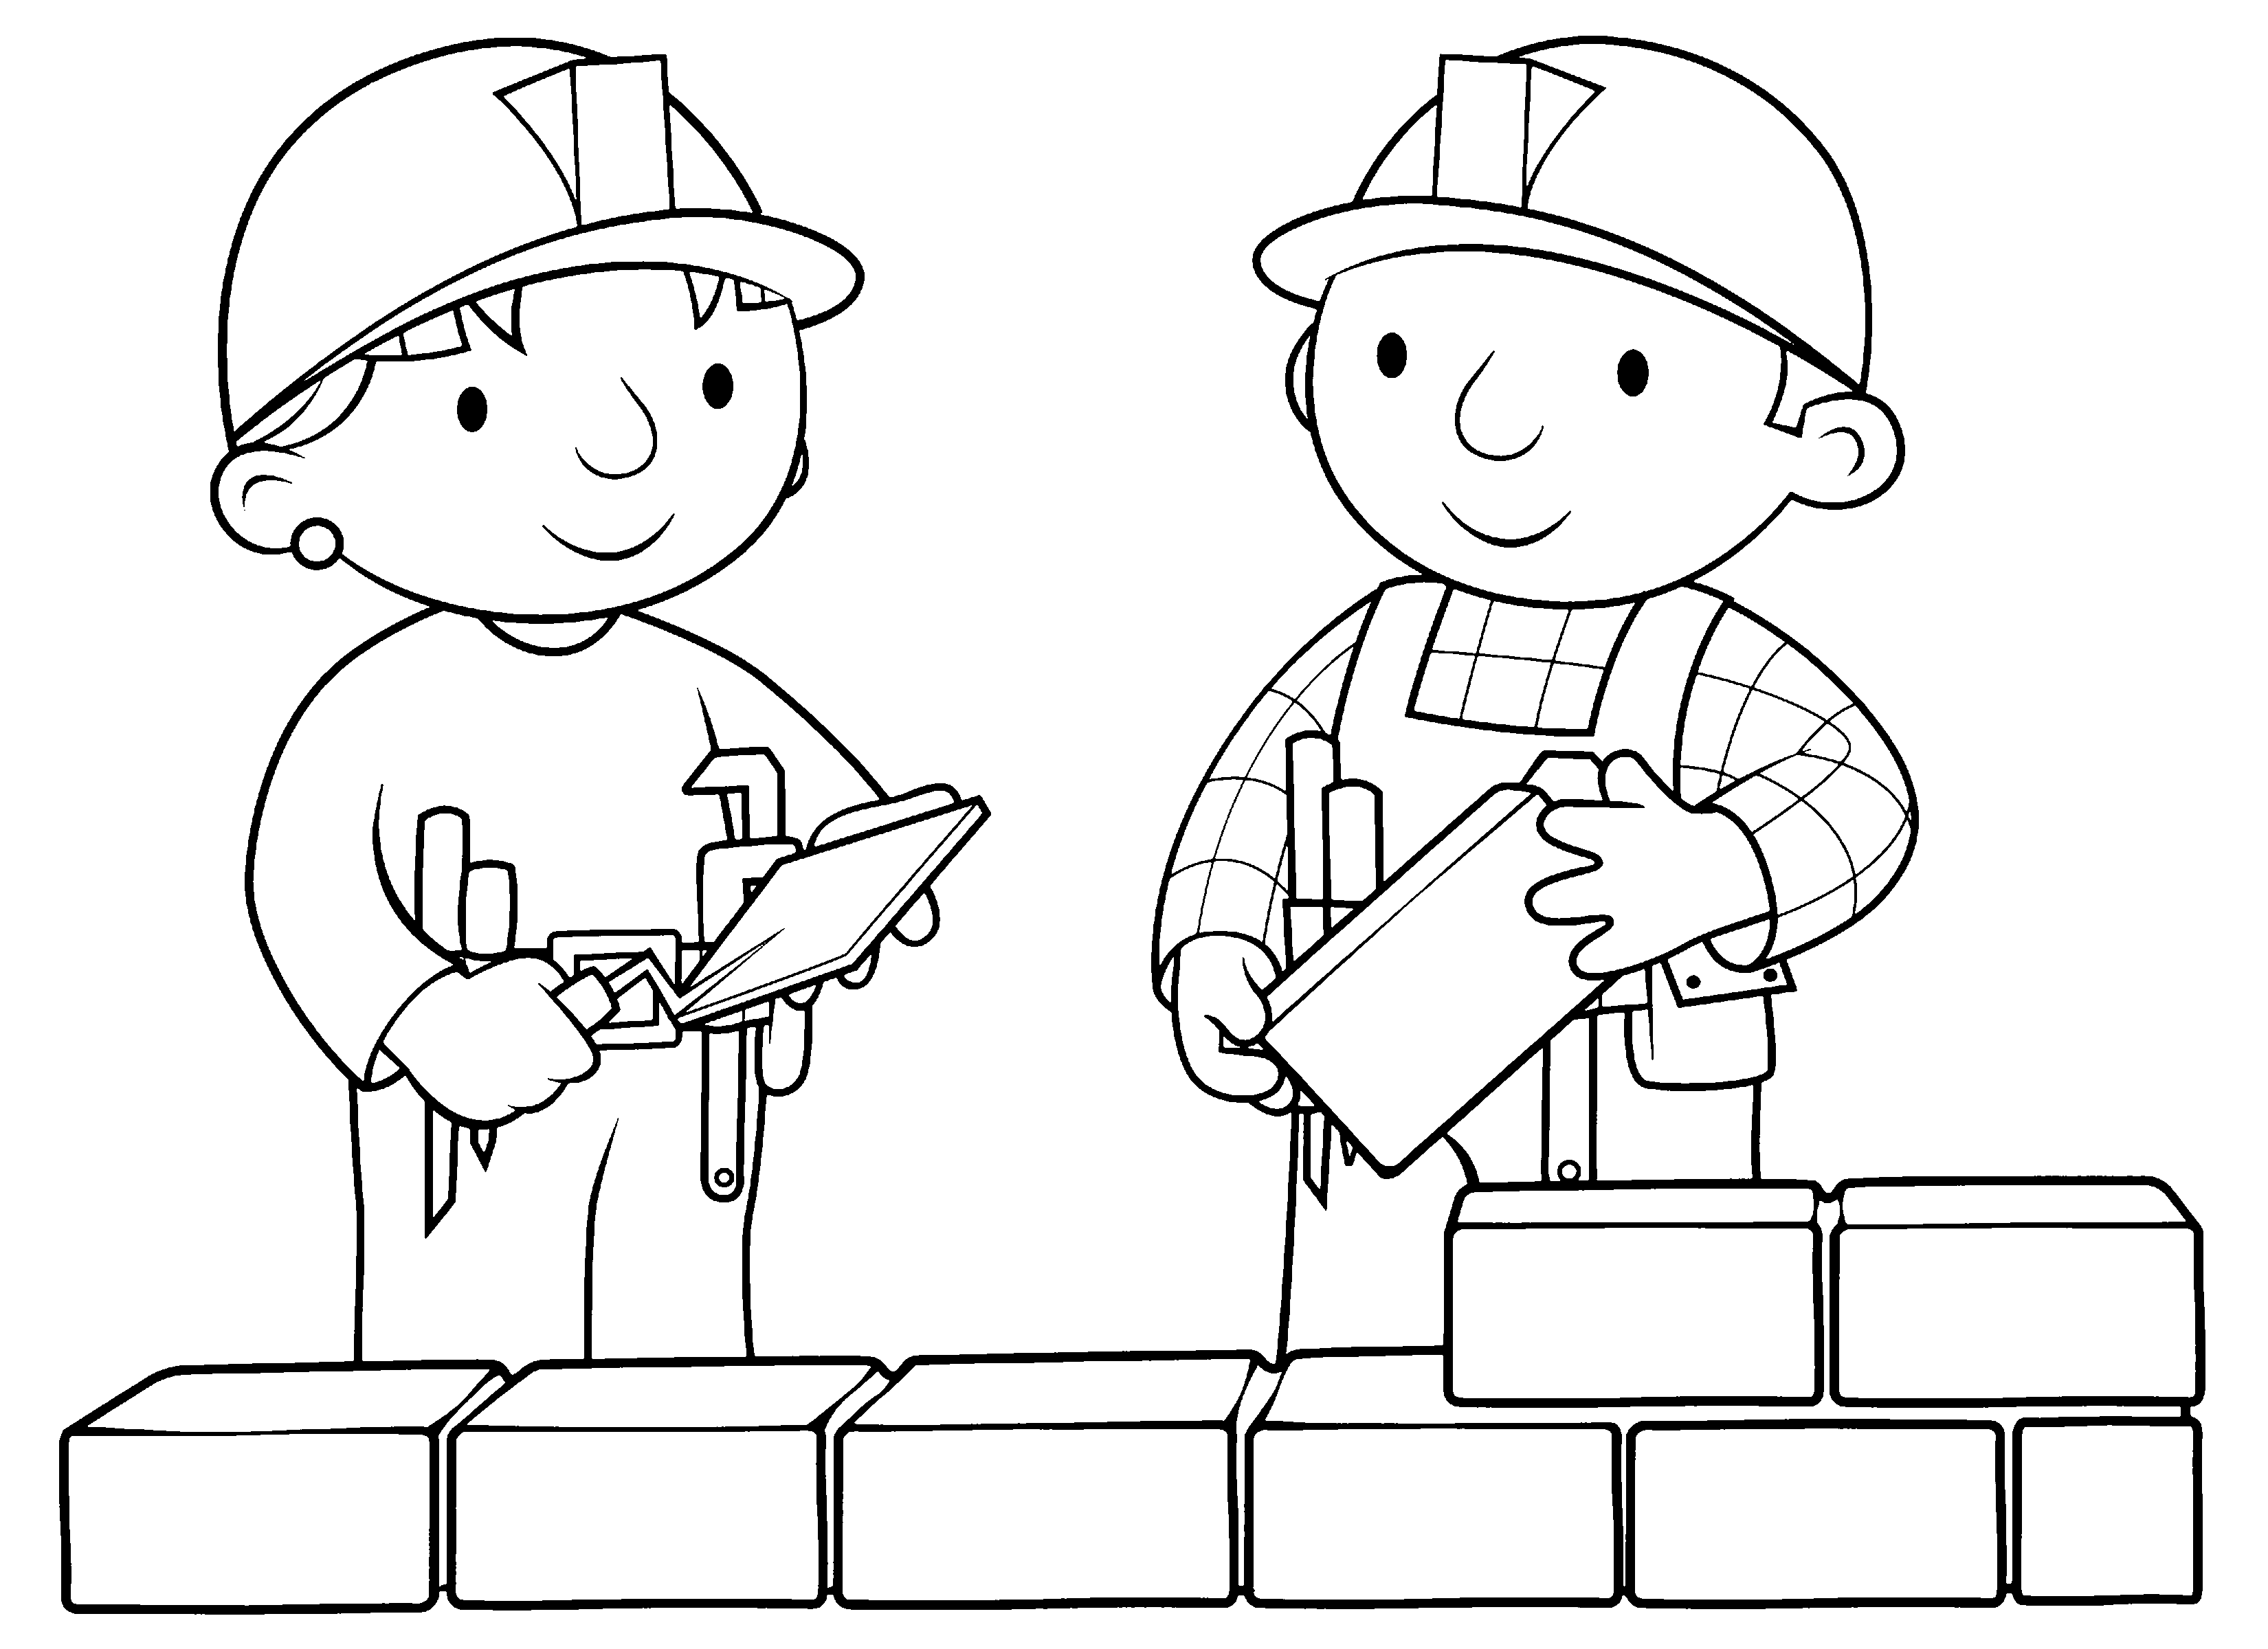 Bob The Builder Coloring Pages Images coloring page